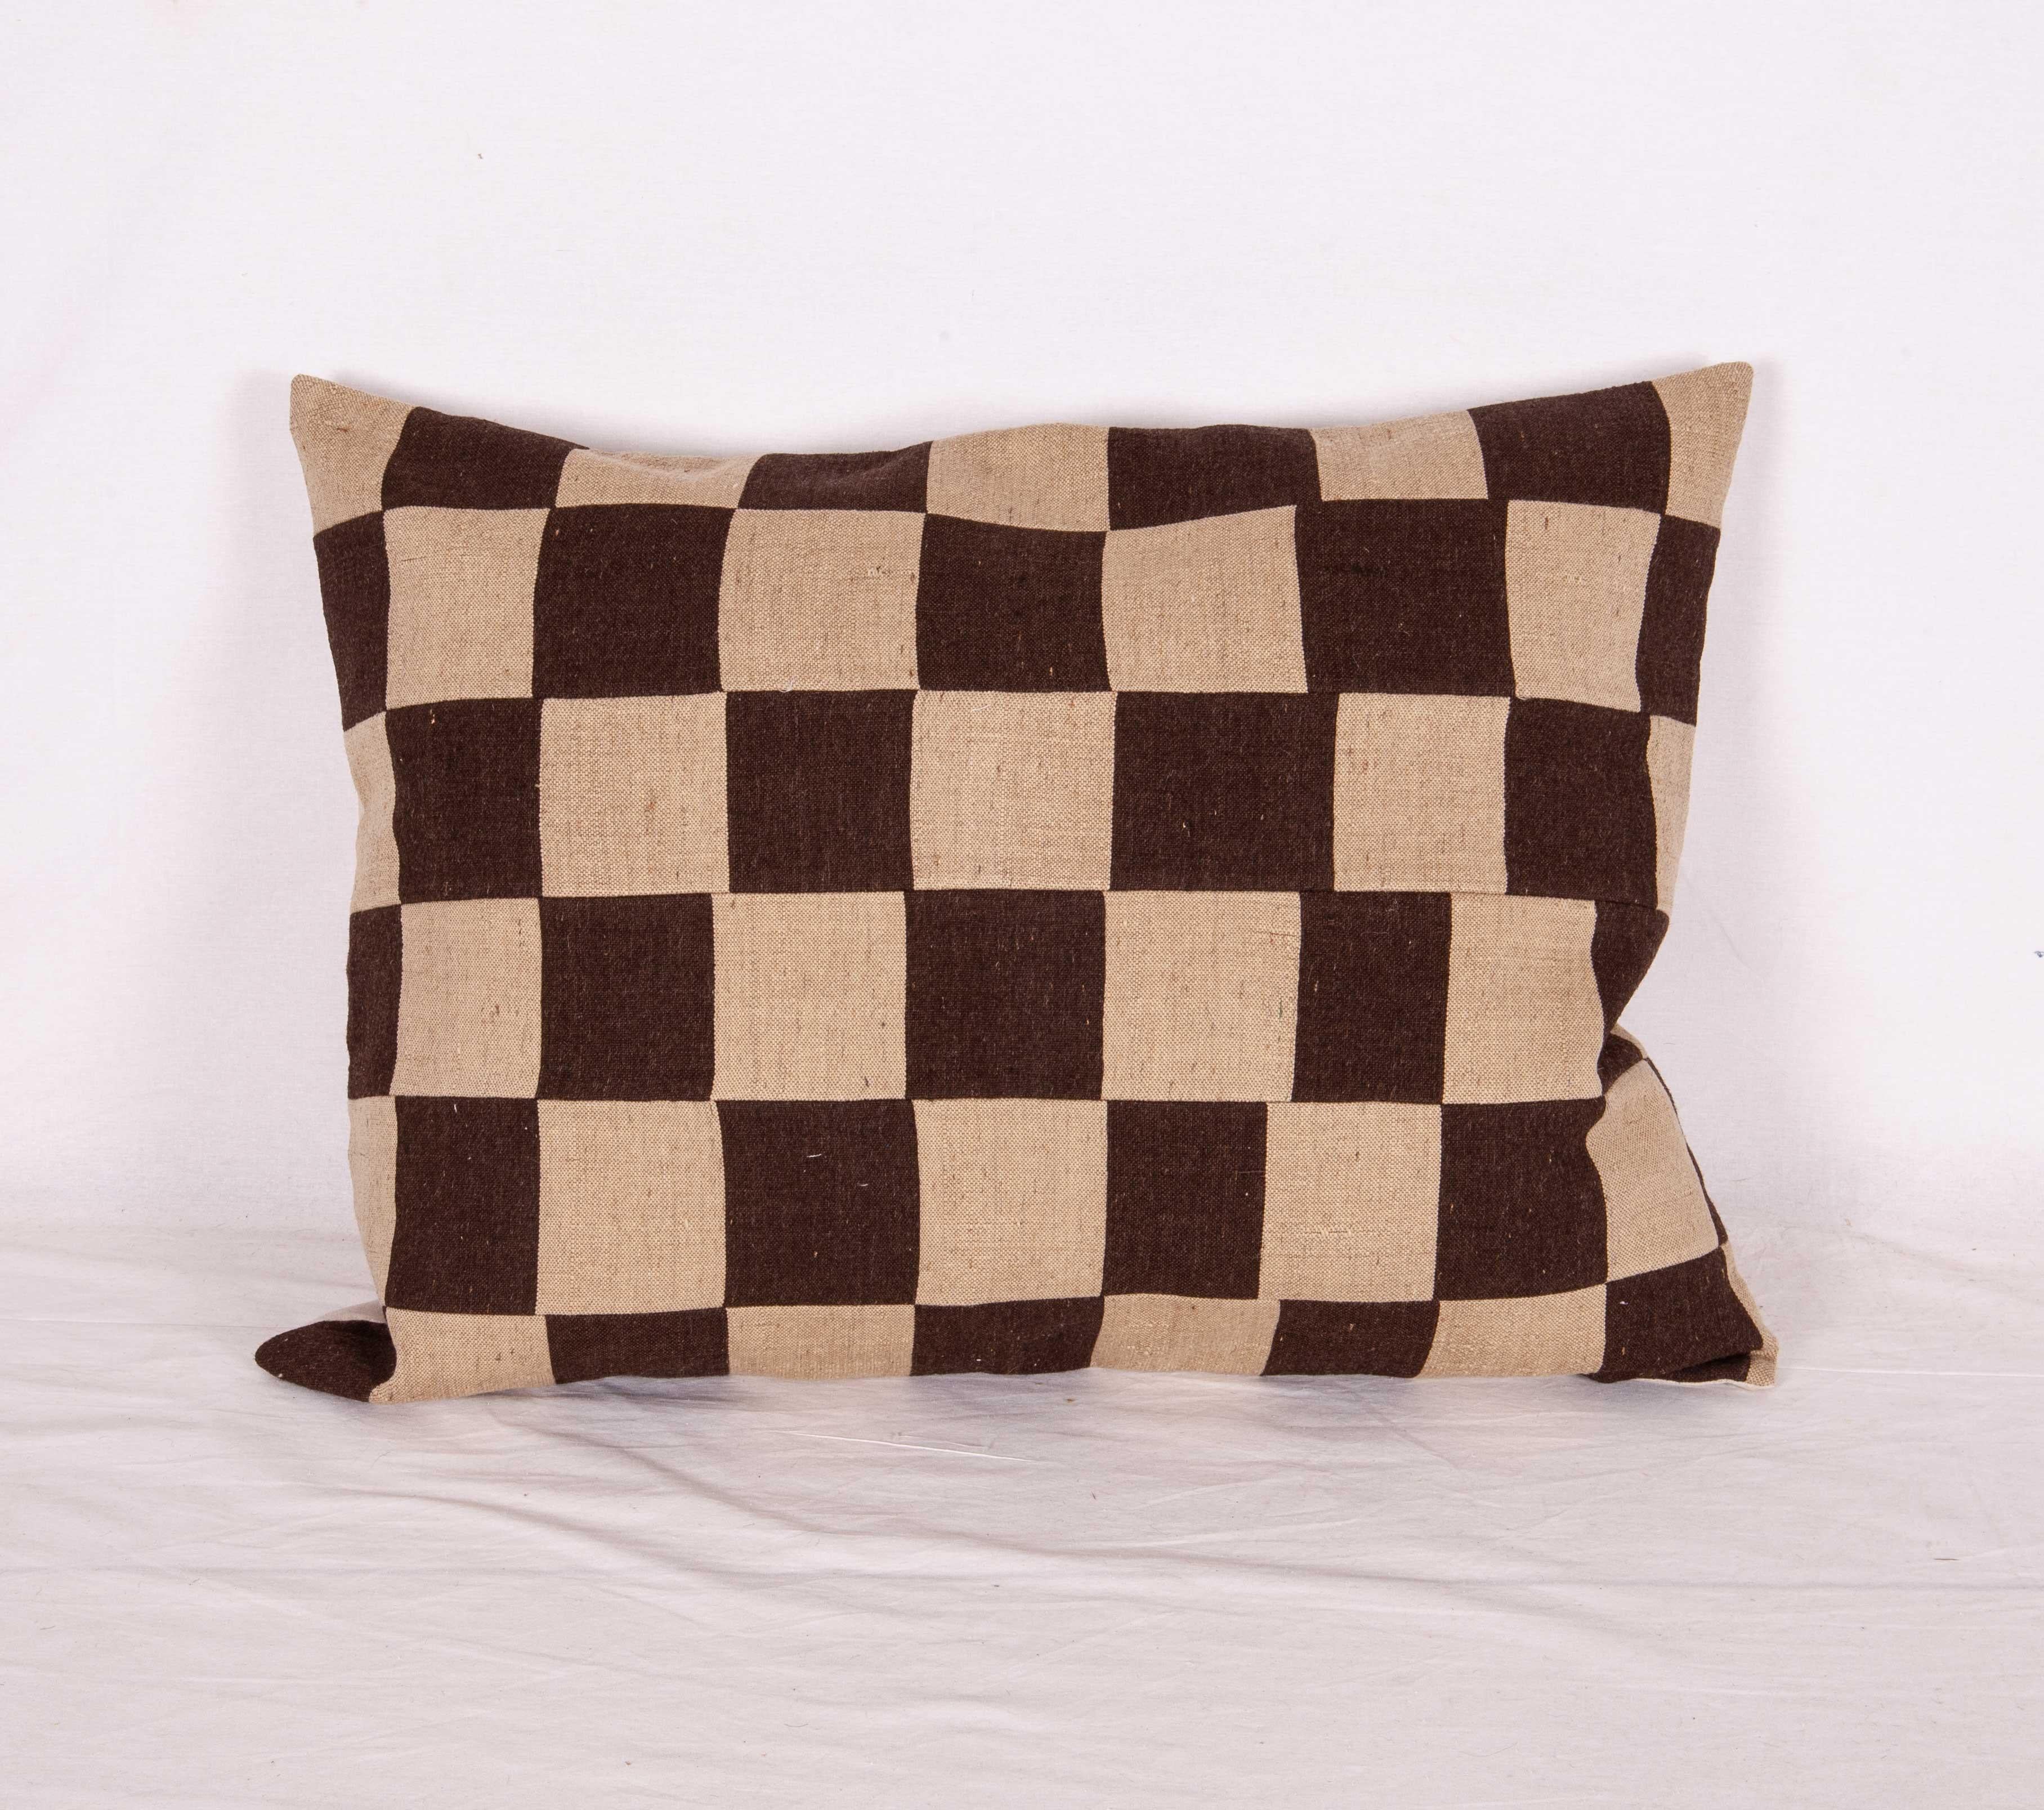 Wool Kilim Pillow Cases Fashioned from a Vintage Cover, Late 20th Century